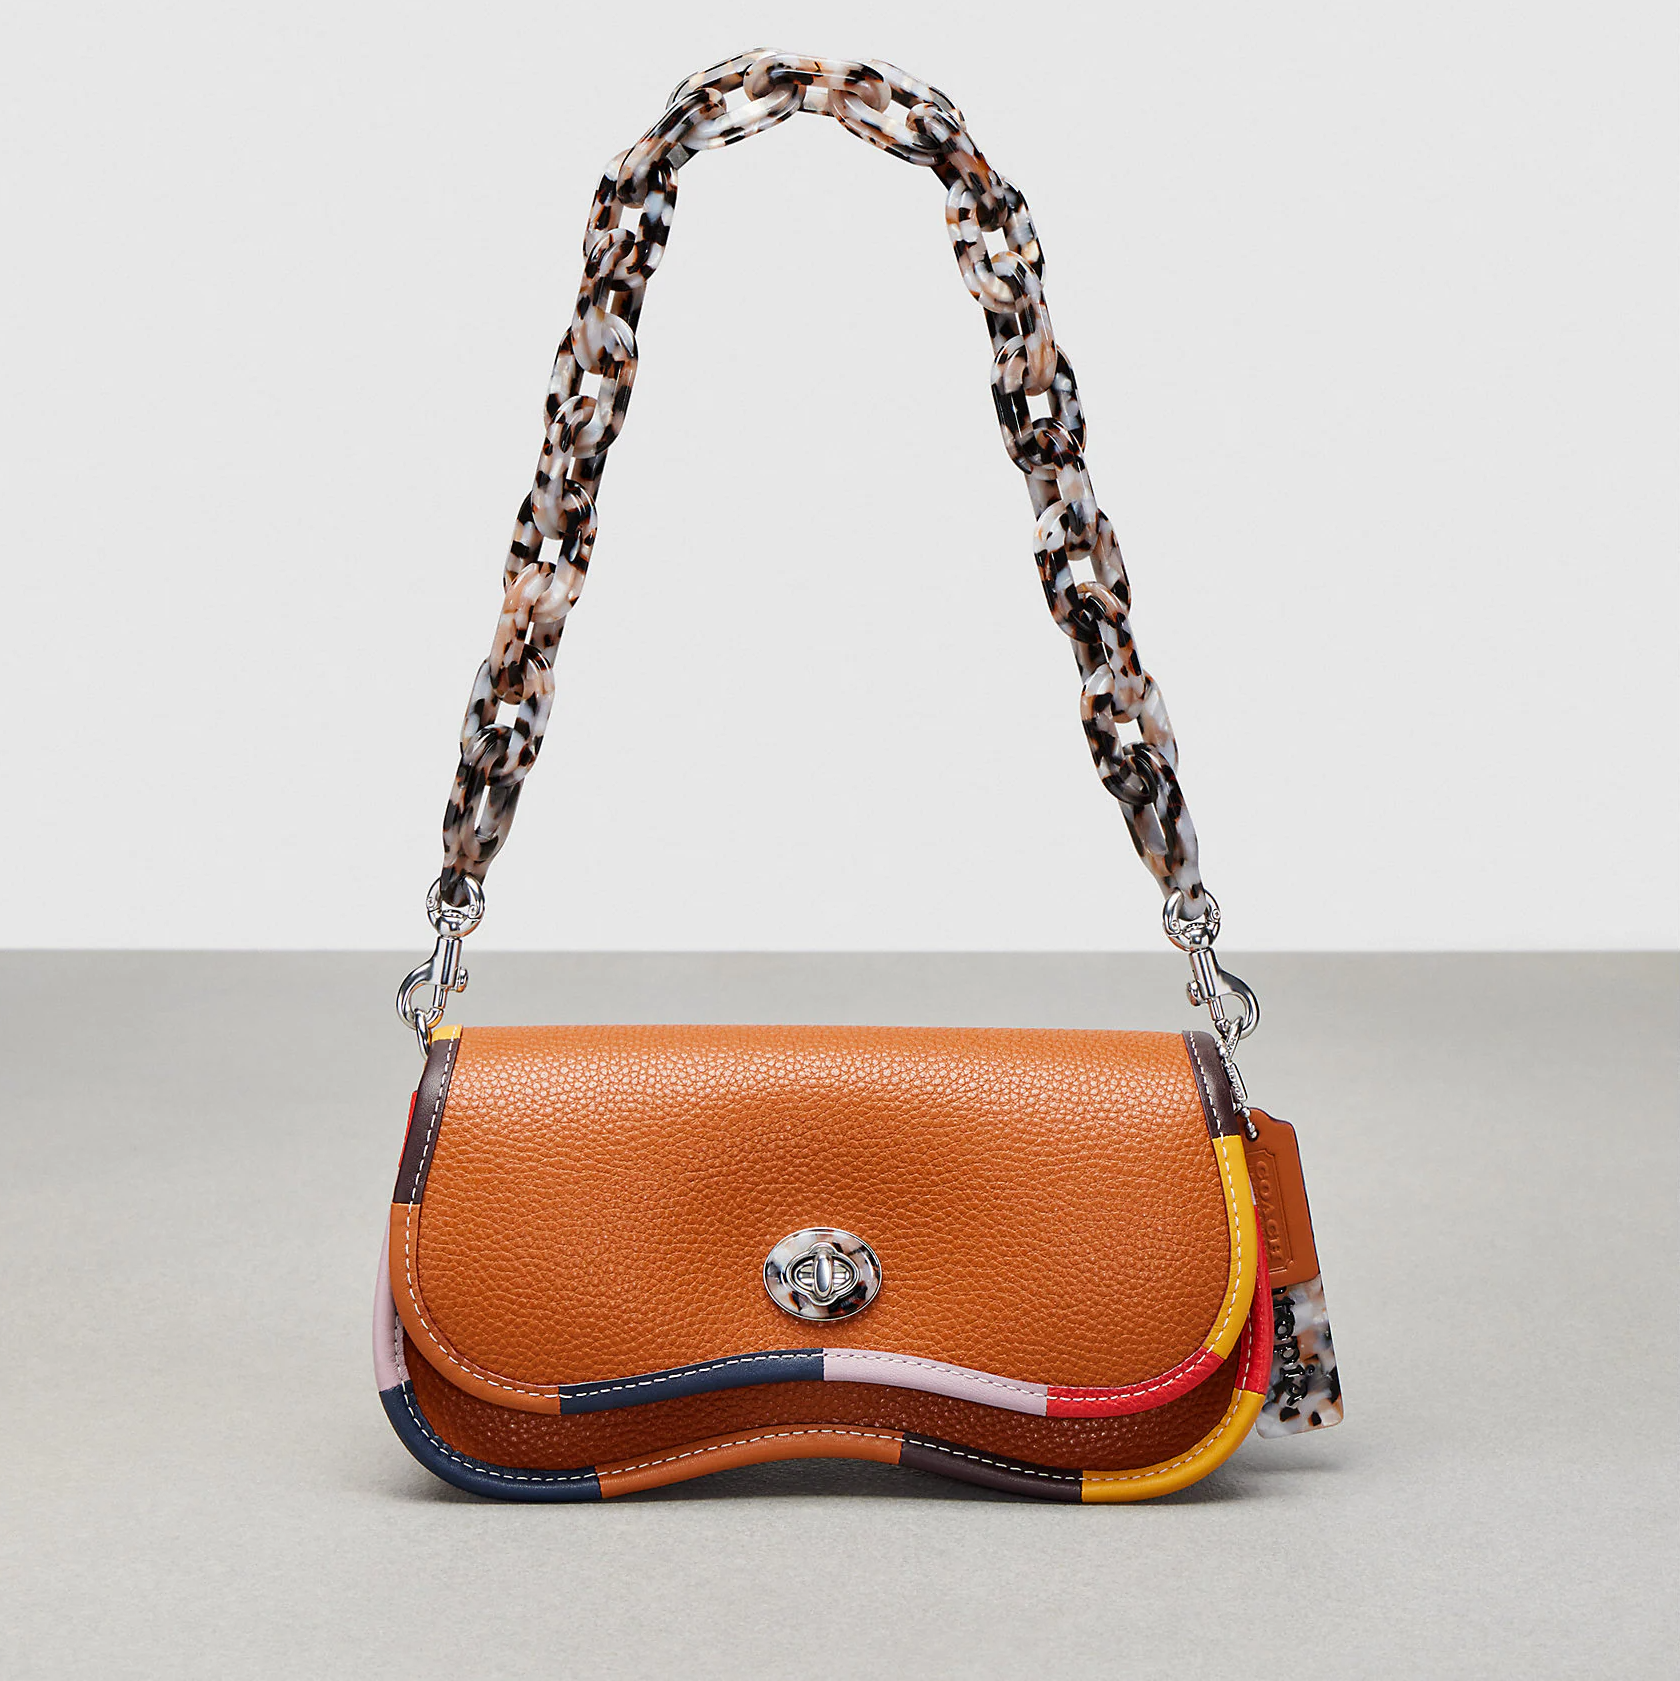 A Coachtopia bag made out of recycled materials in brown with a multicolored strap chain.